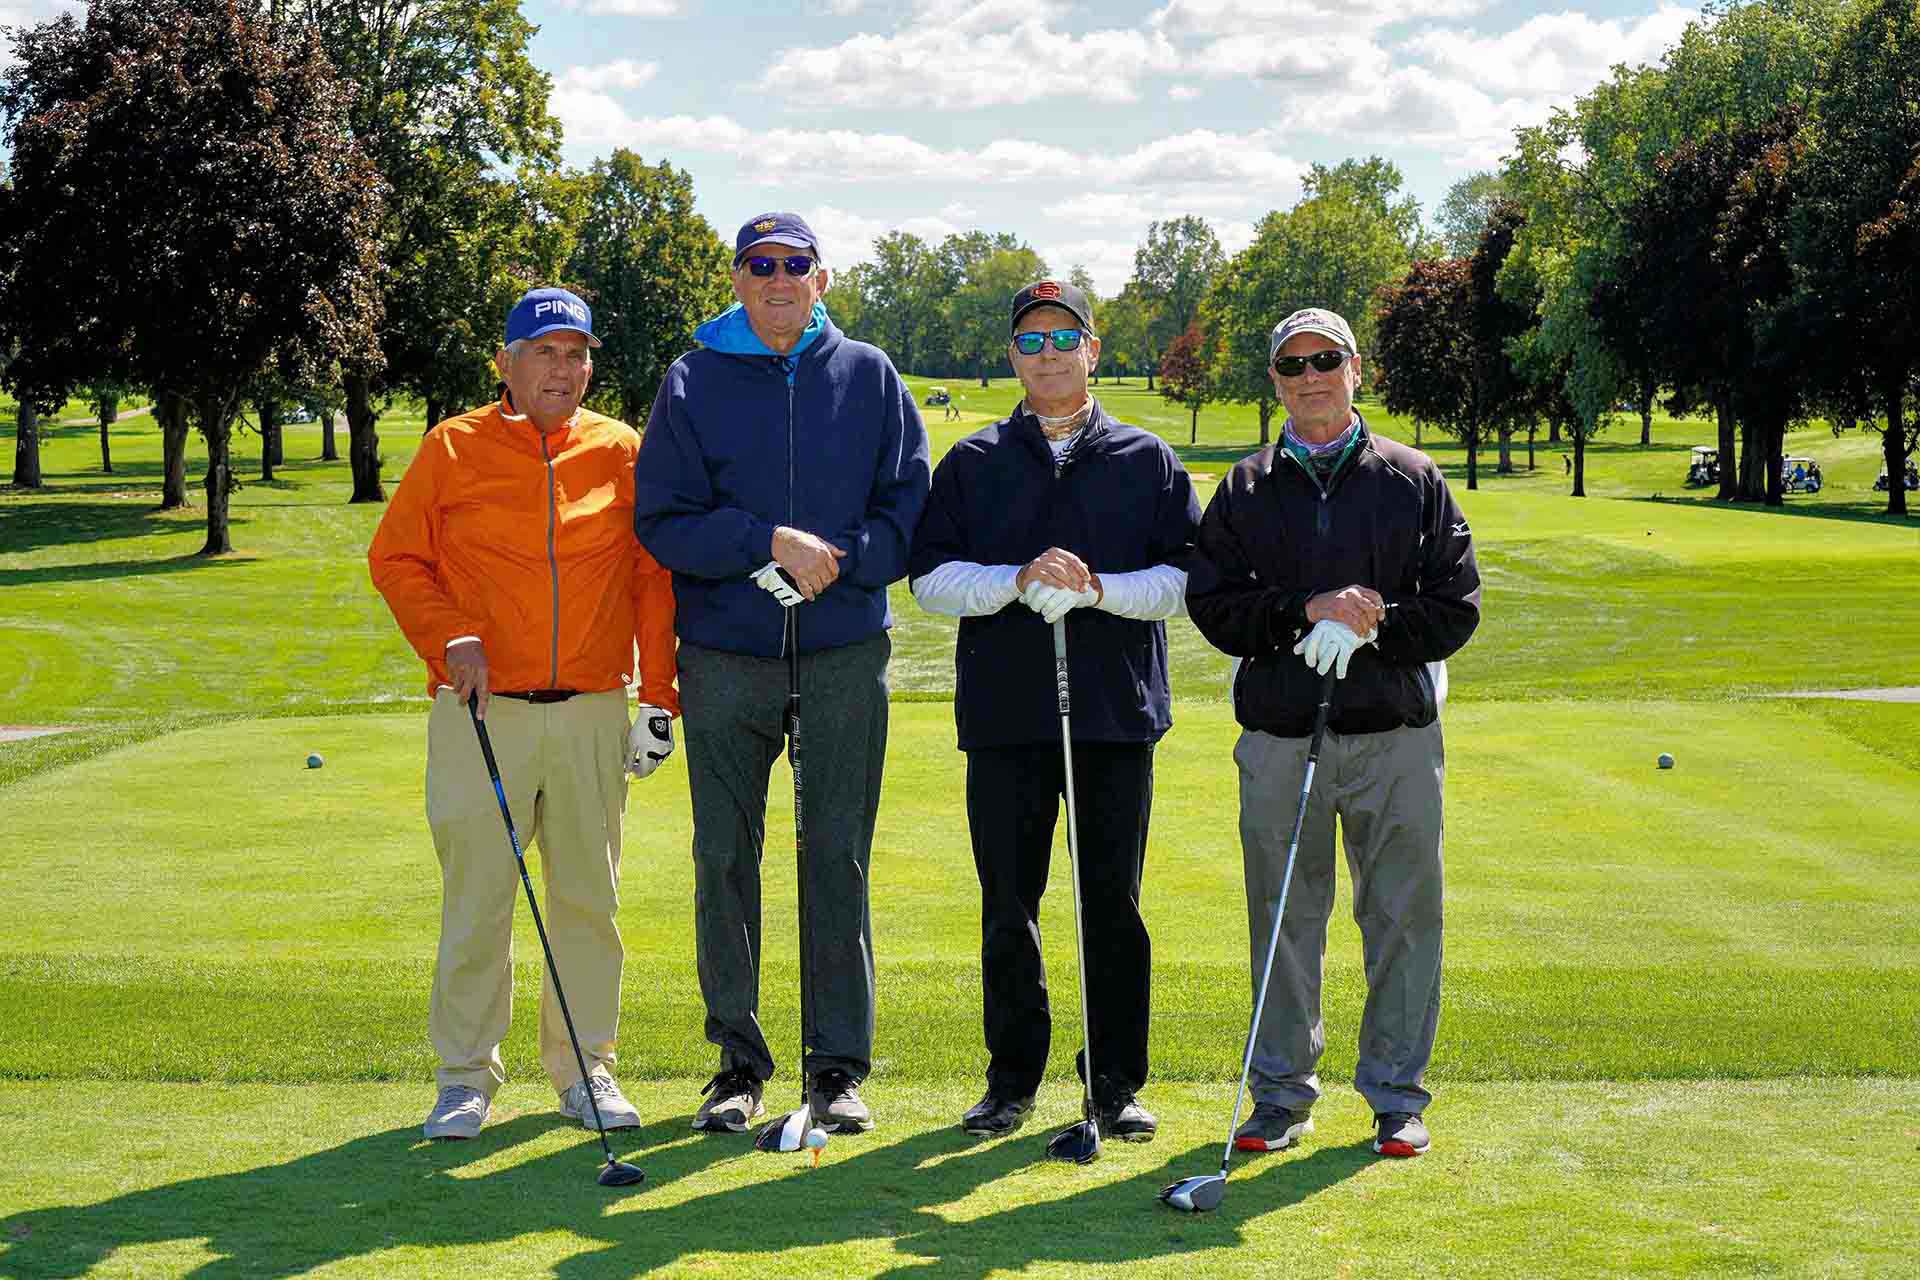 2020-endownment-classic-four-people-on-golf-course-smile-for-photo